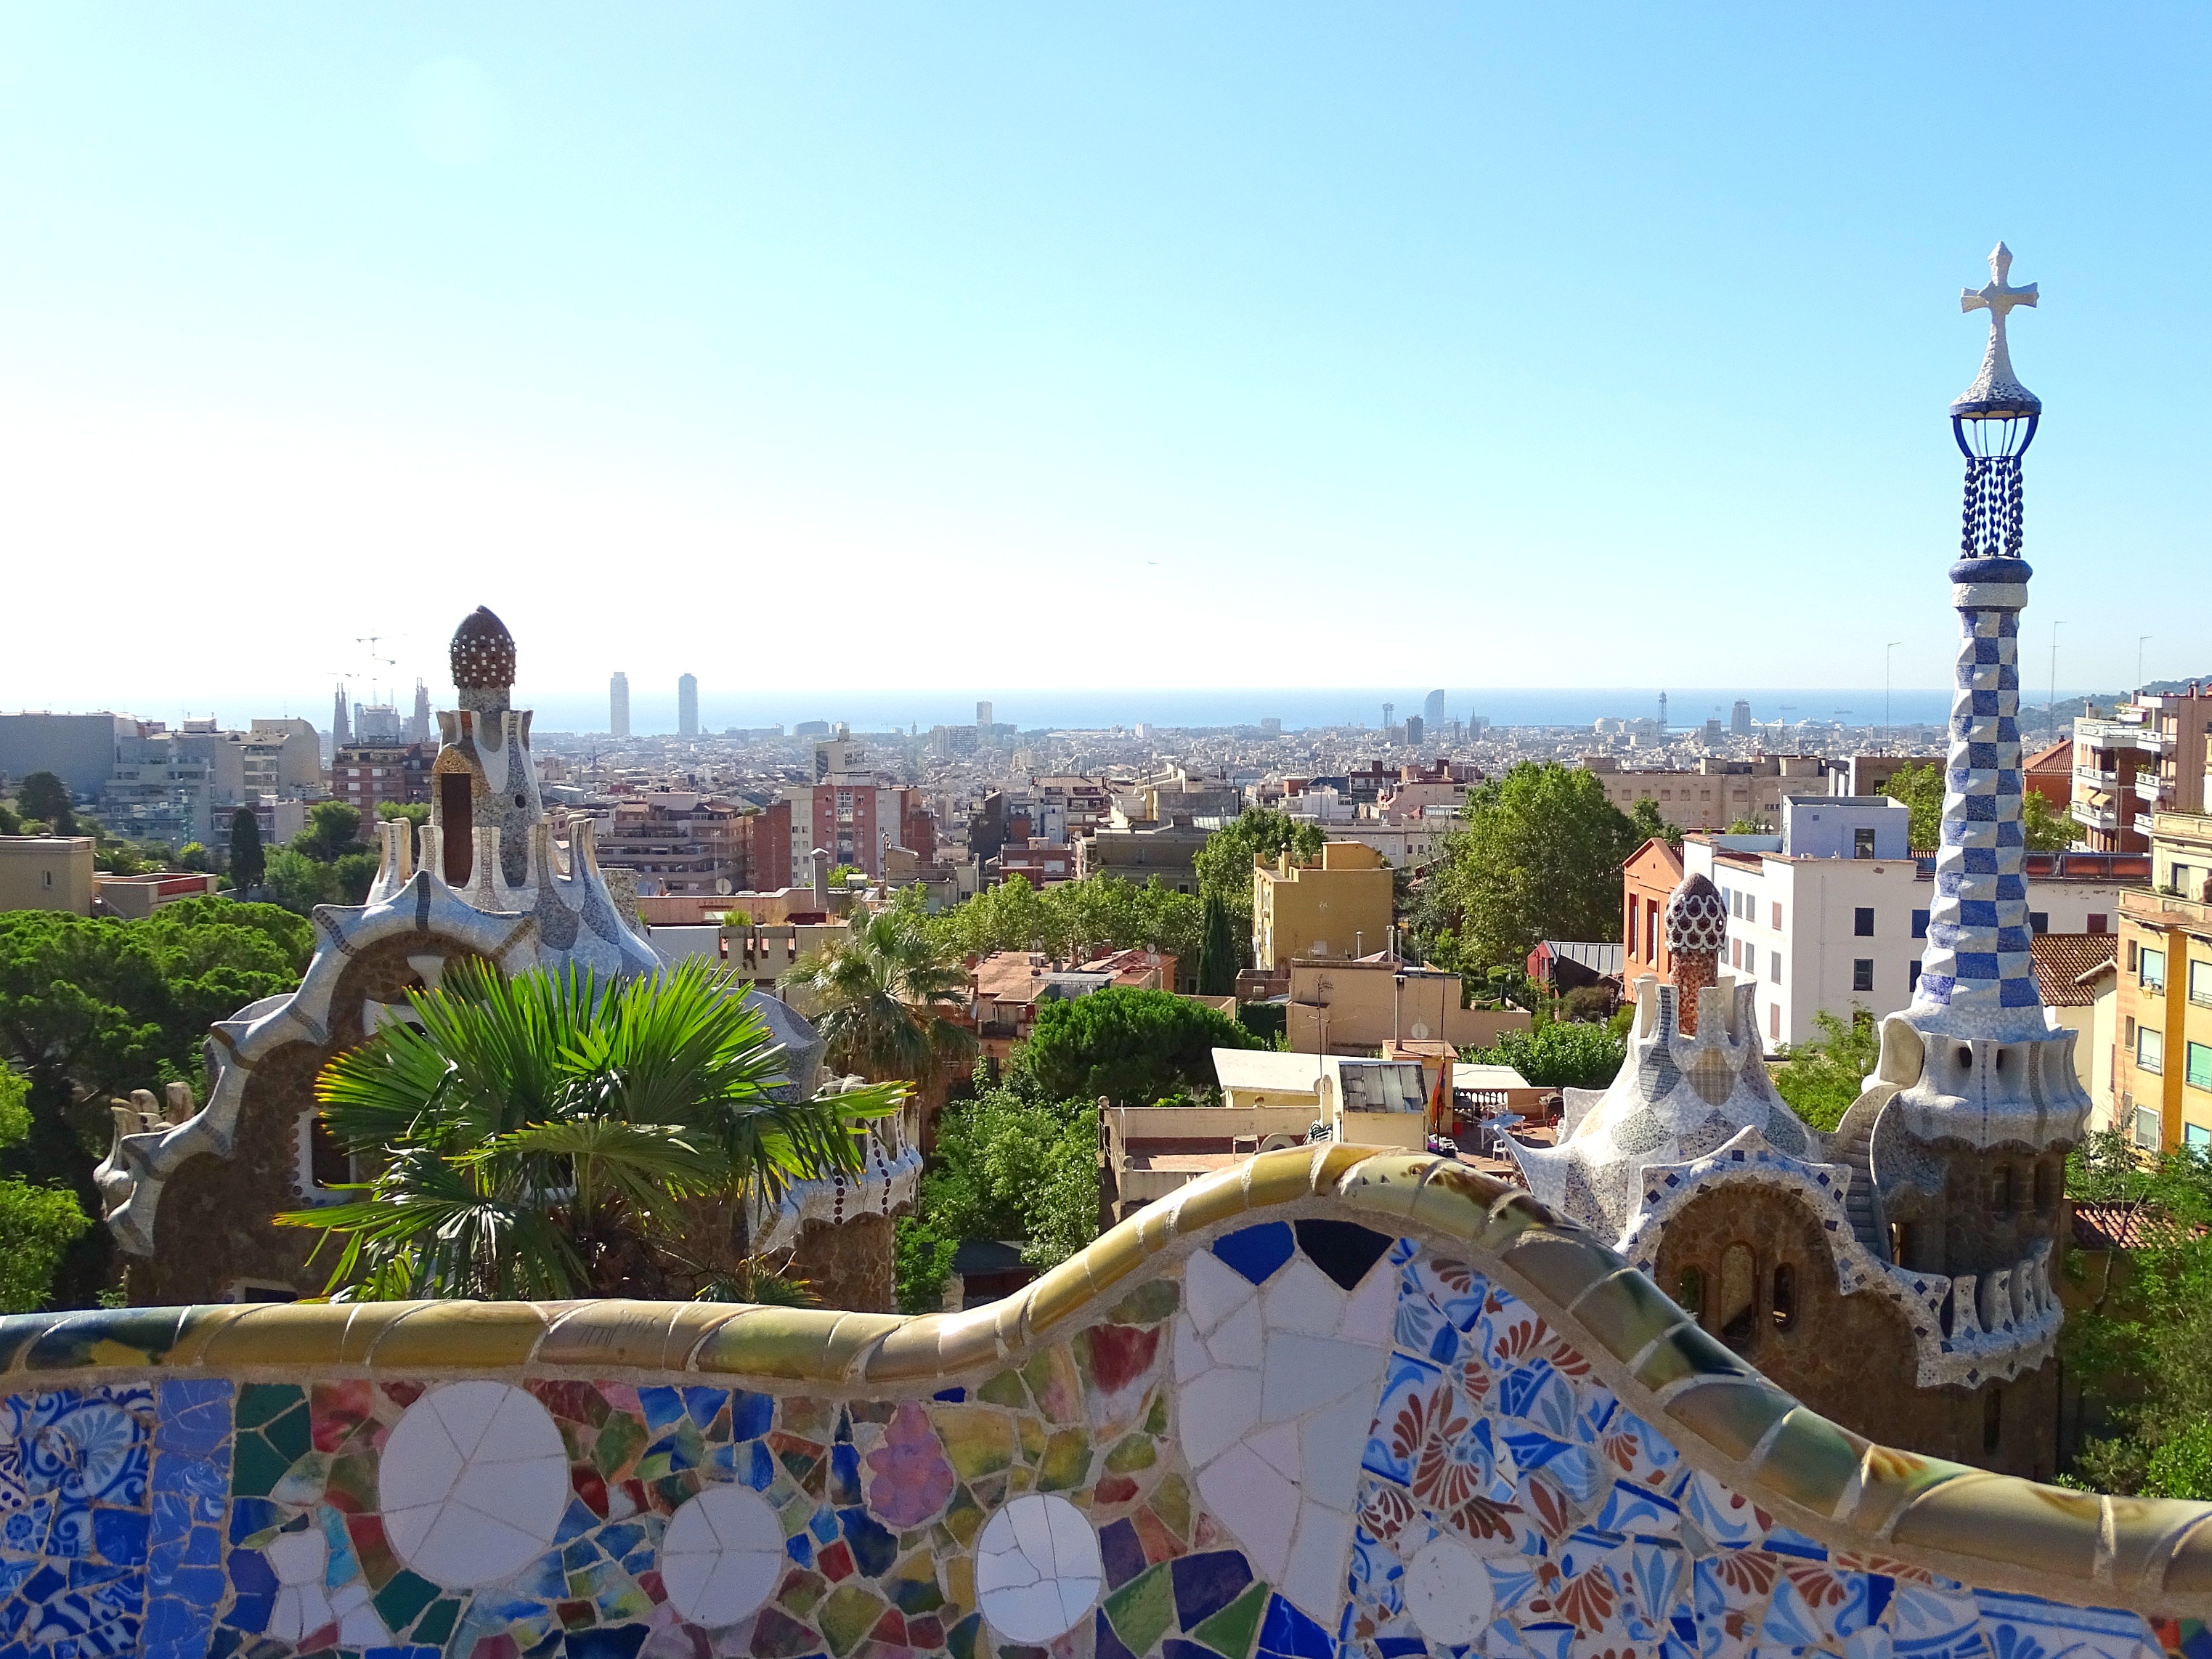 10 Unmissable Things to do in Barcelona - Map & Family3046 x 2284